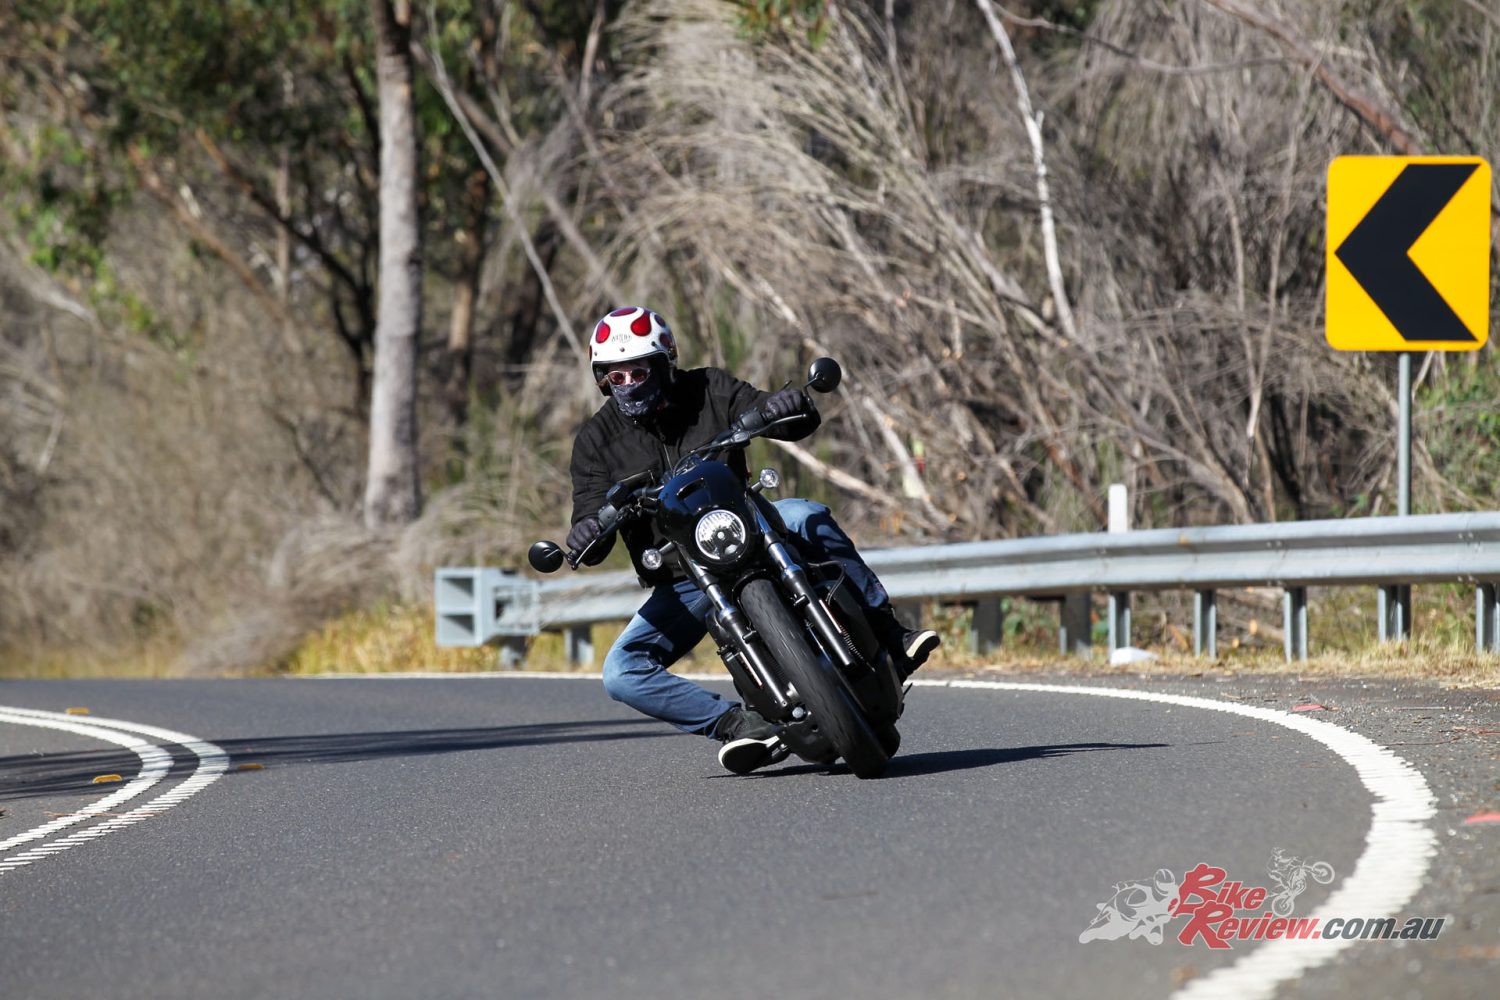 Taking off from Fraser Motorcycles in Wollongong and the unchartered territory of the Nightster S continues, this thing loves to build power up until the redline!